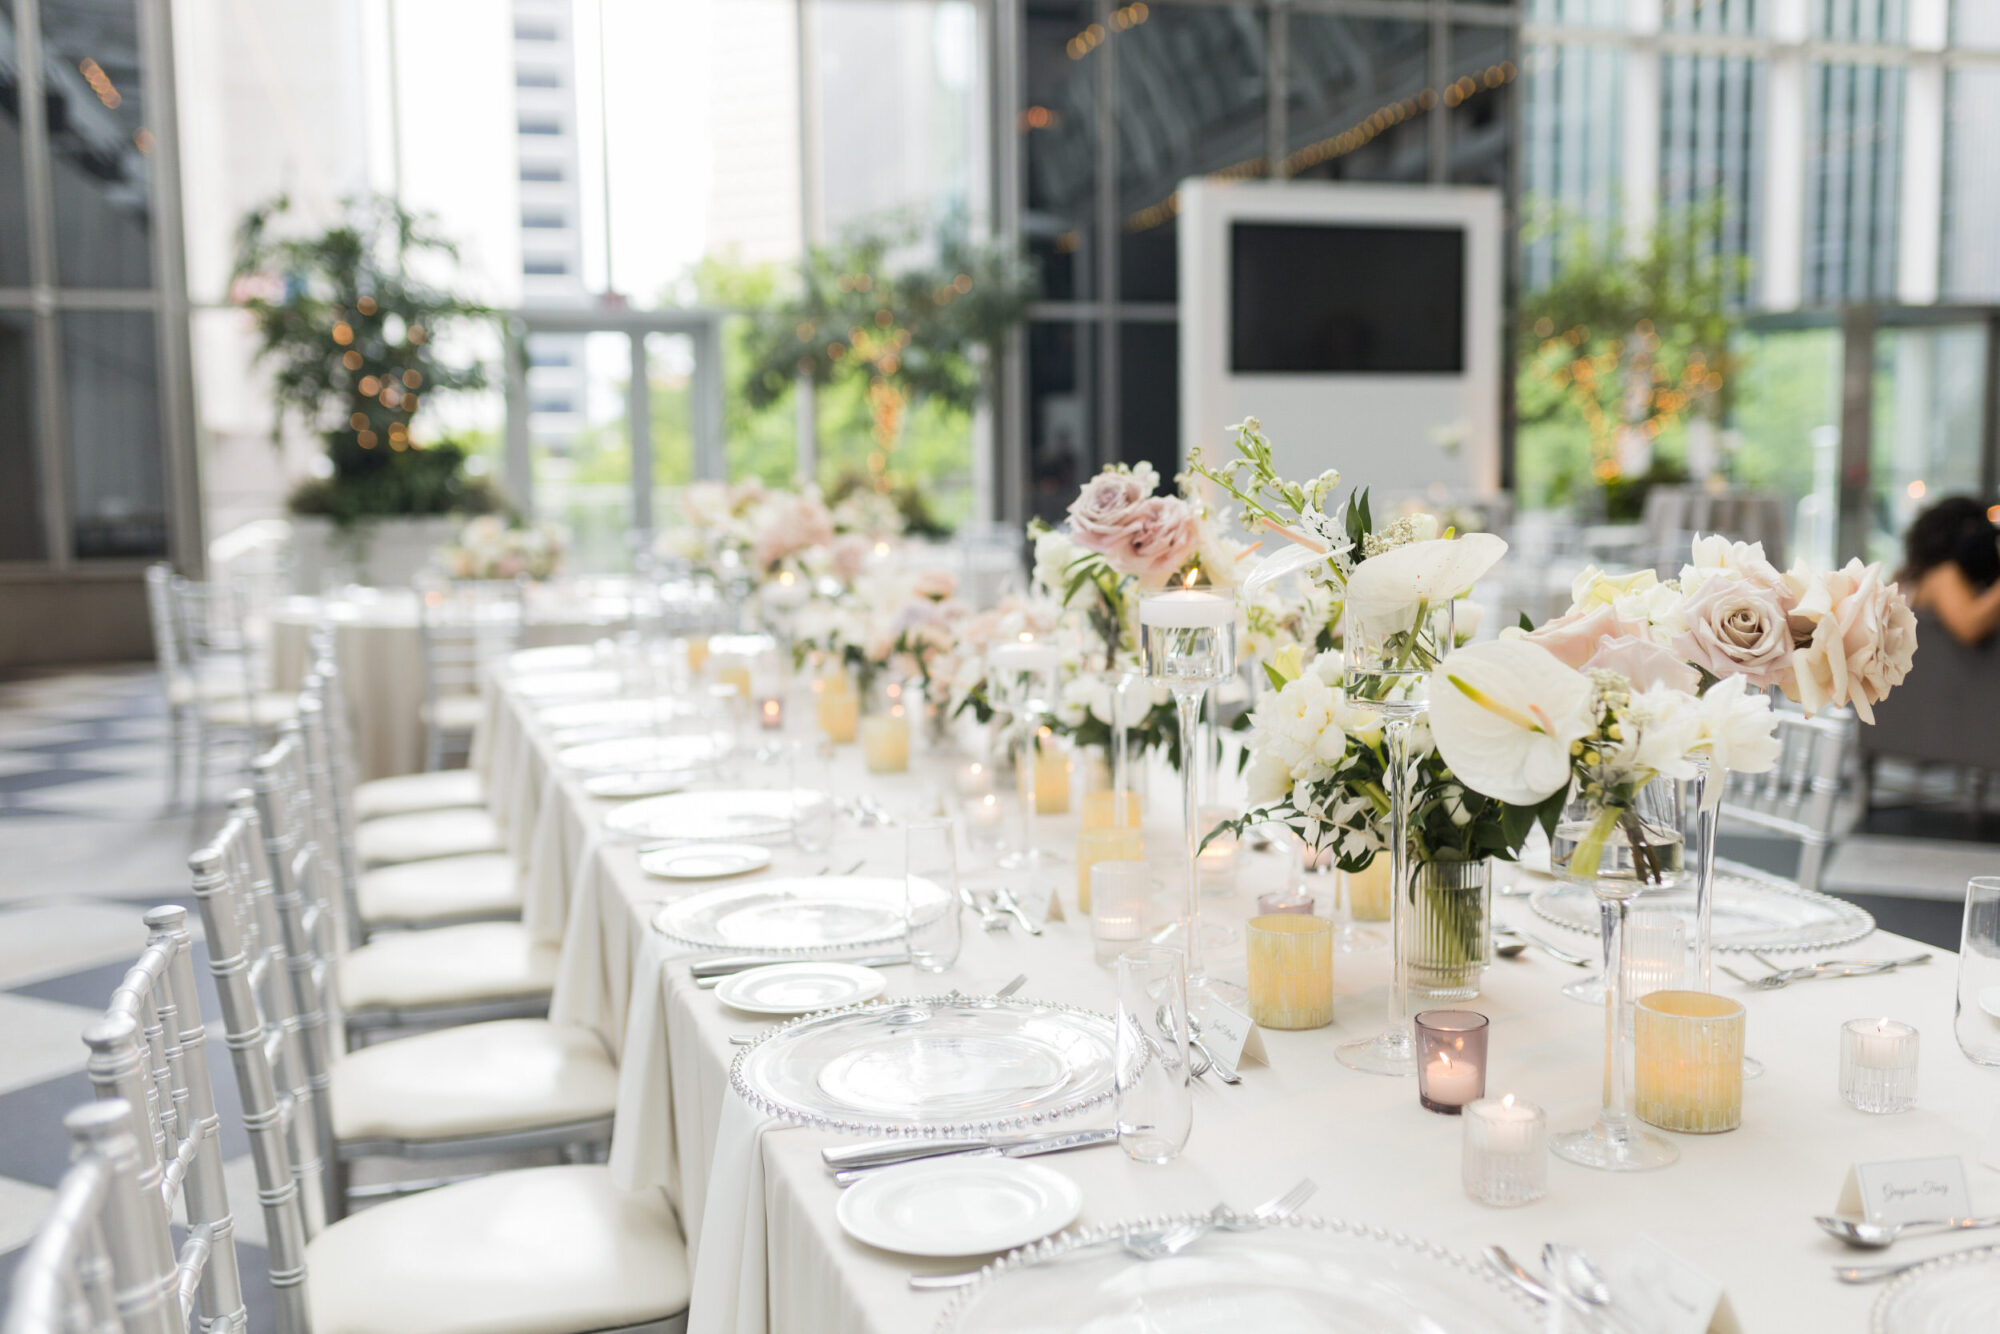 wedding reception at ppg wintergarden • PPG Wintergarden Weddings: Modern Glass-Walled Pittsburgh Receptions You'll Love!